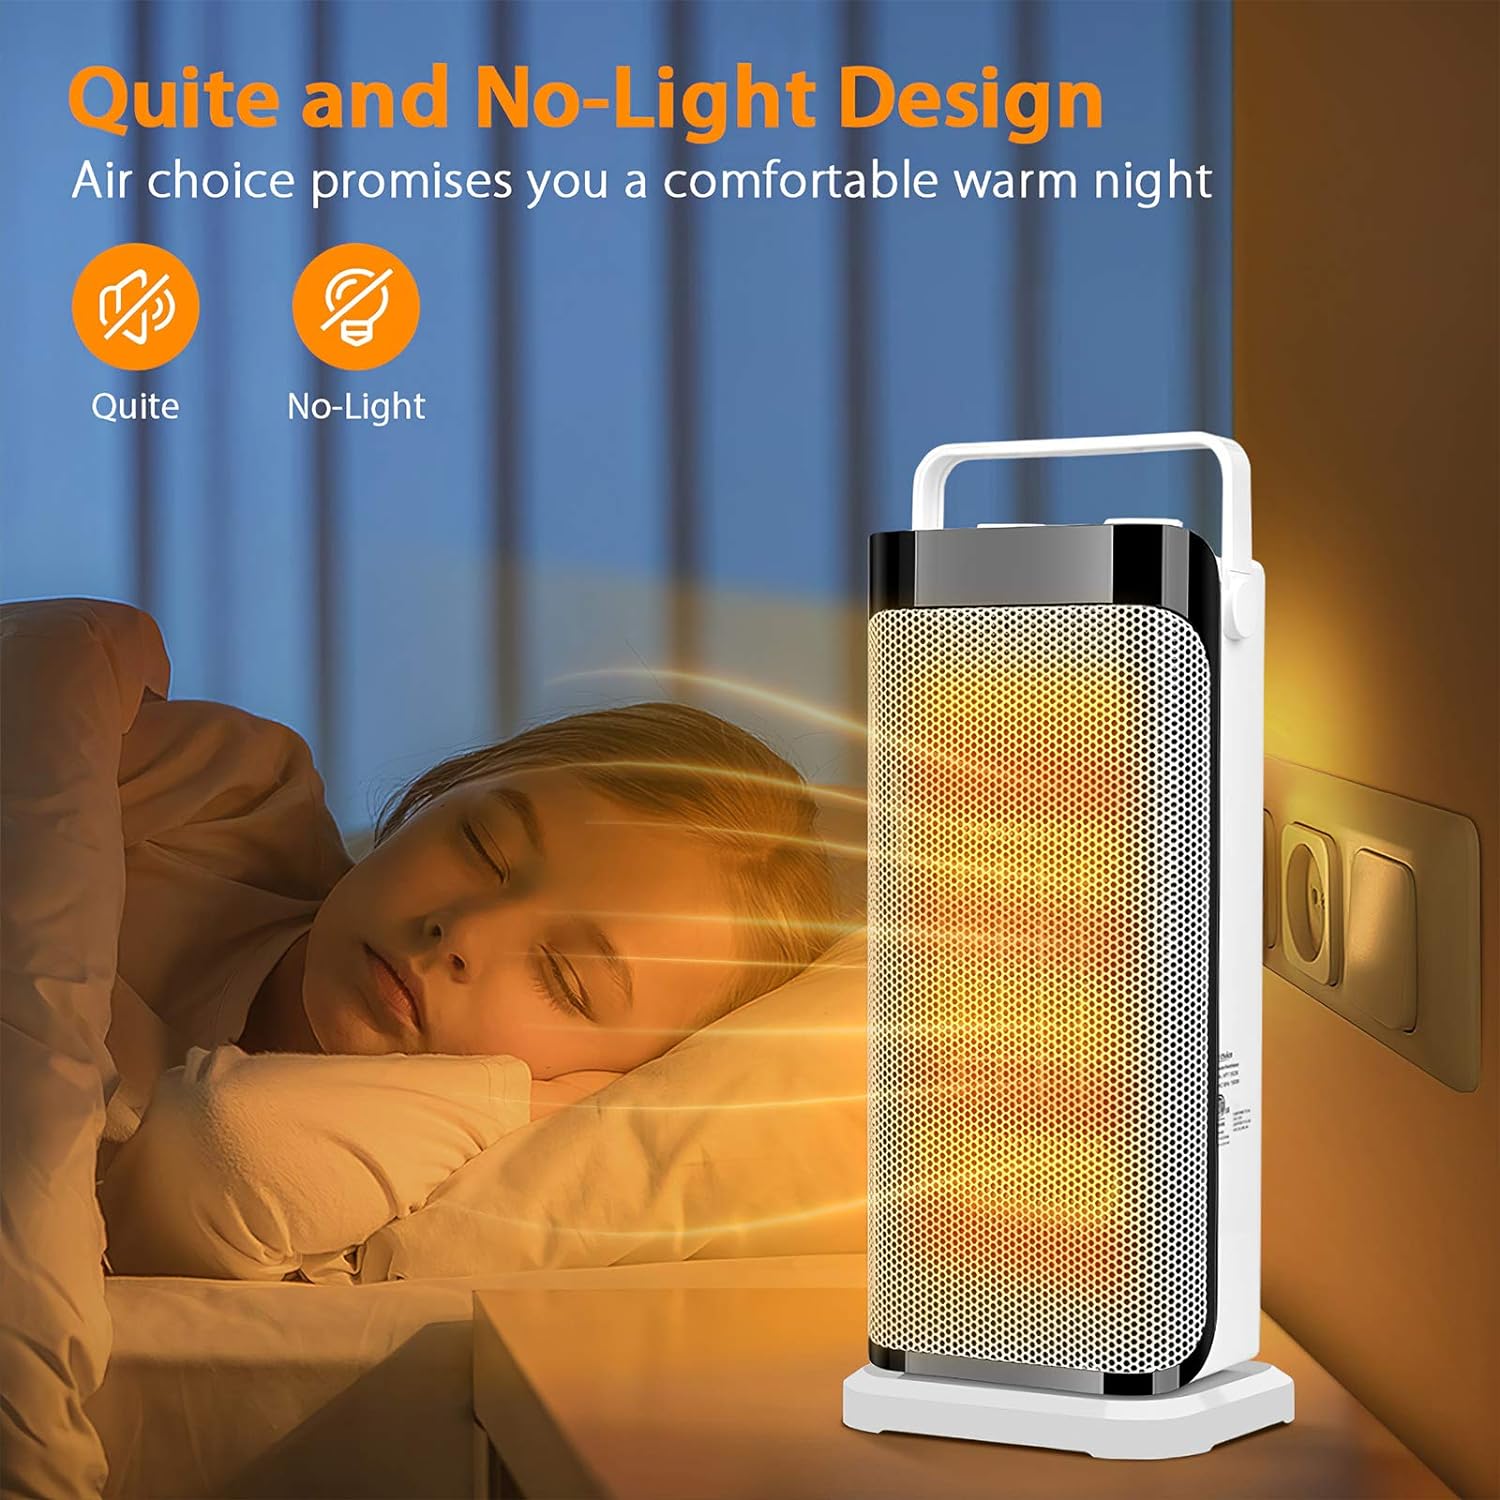 Space Heater for Office - Portable Electric Ceramic Quiet Tower Heater Fan with Thermostat, Fast Heating, 120°Oscillating Efficient for Personal Home Bedroom Large Room Bathroom Under Desk Indoor Use